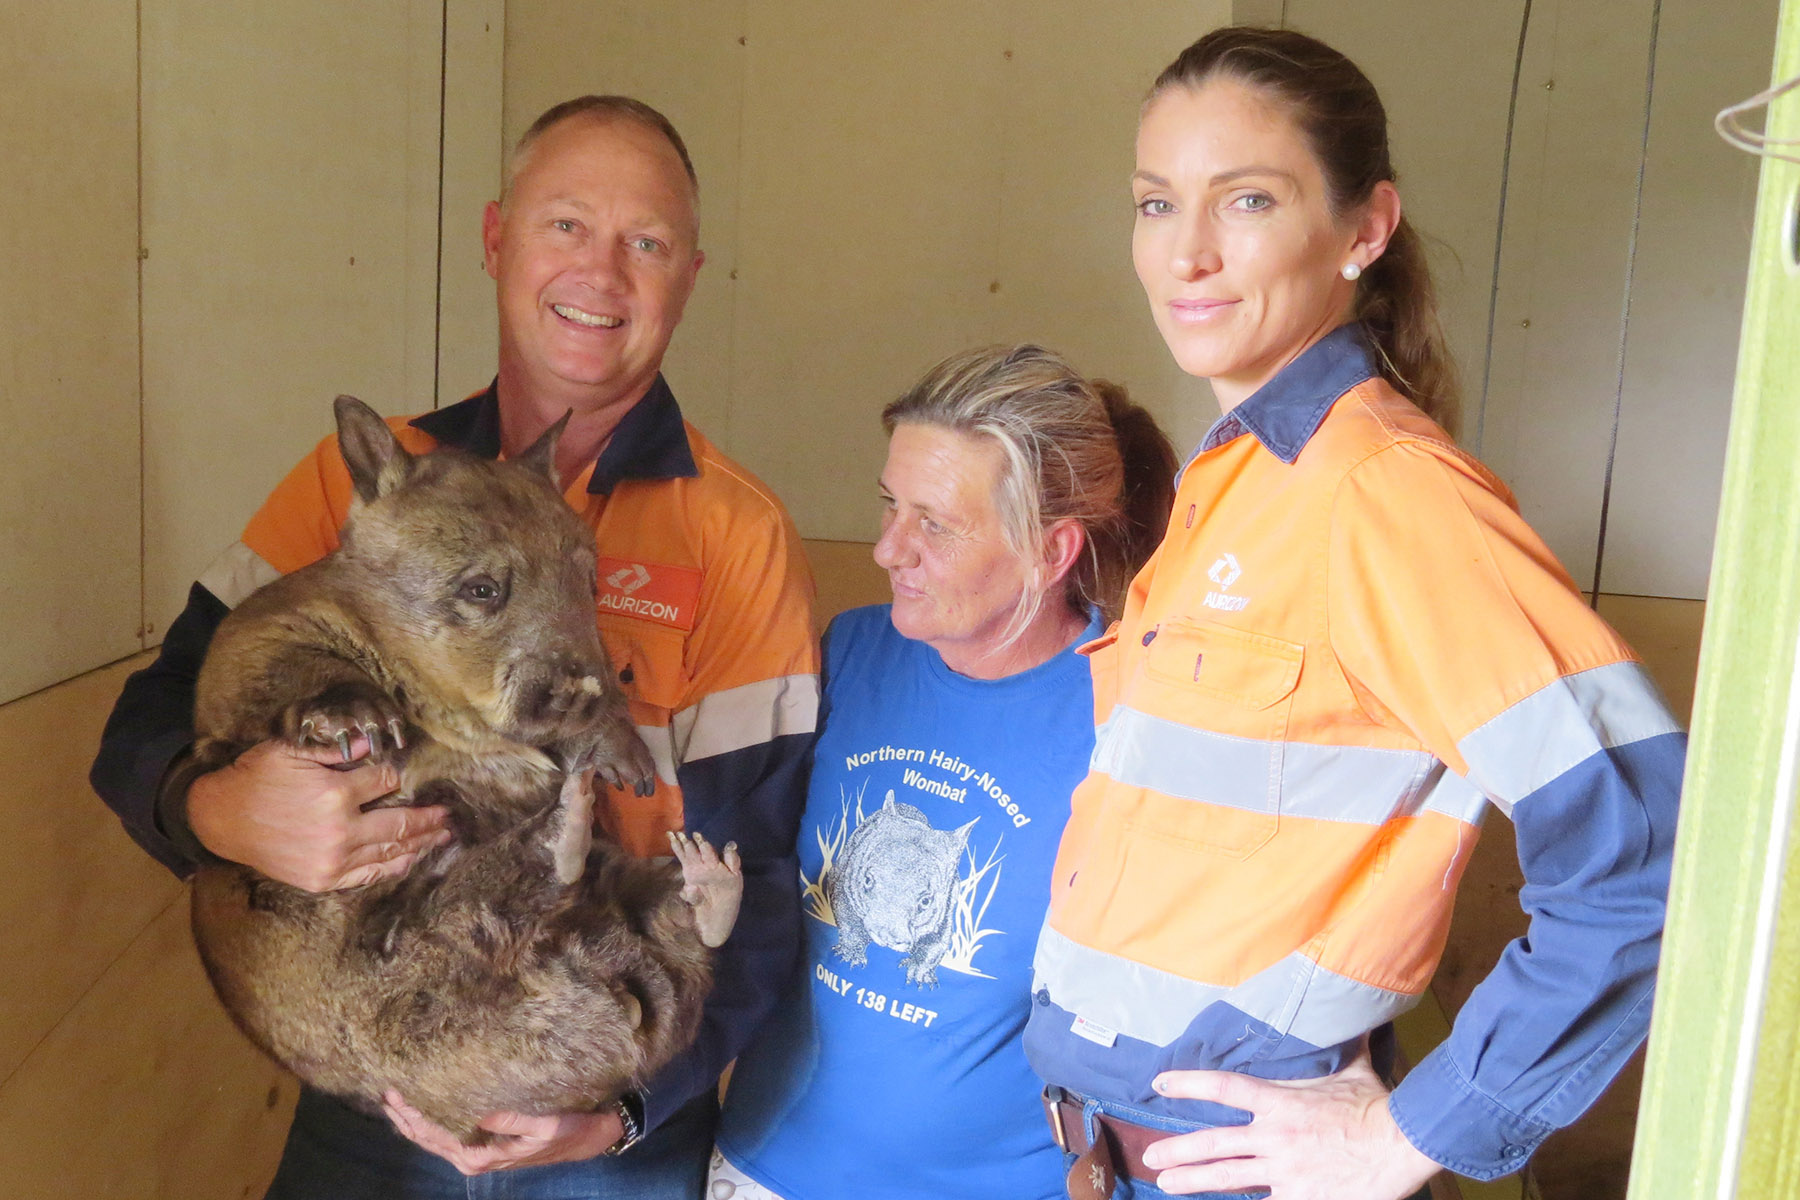 Aurizon employees with Kyle the wombat